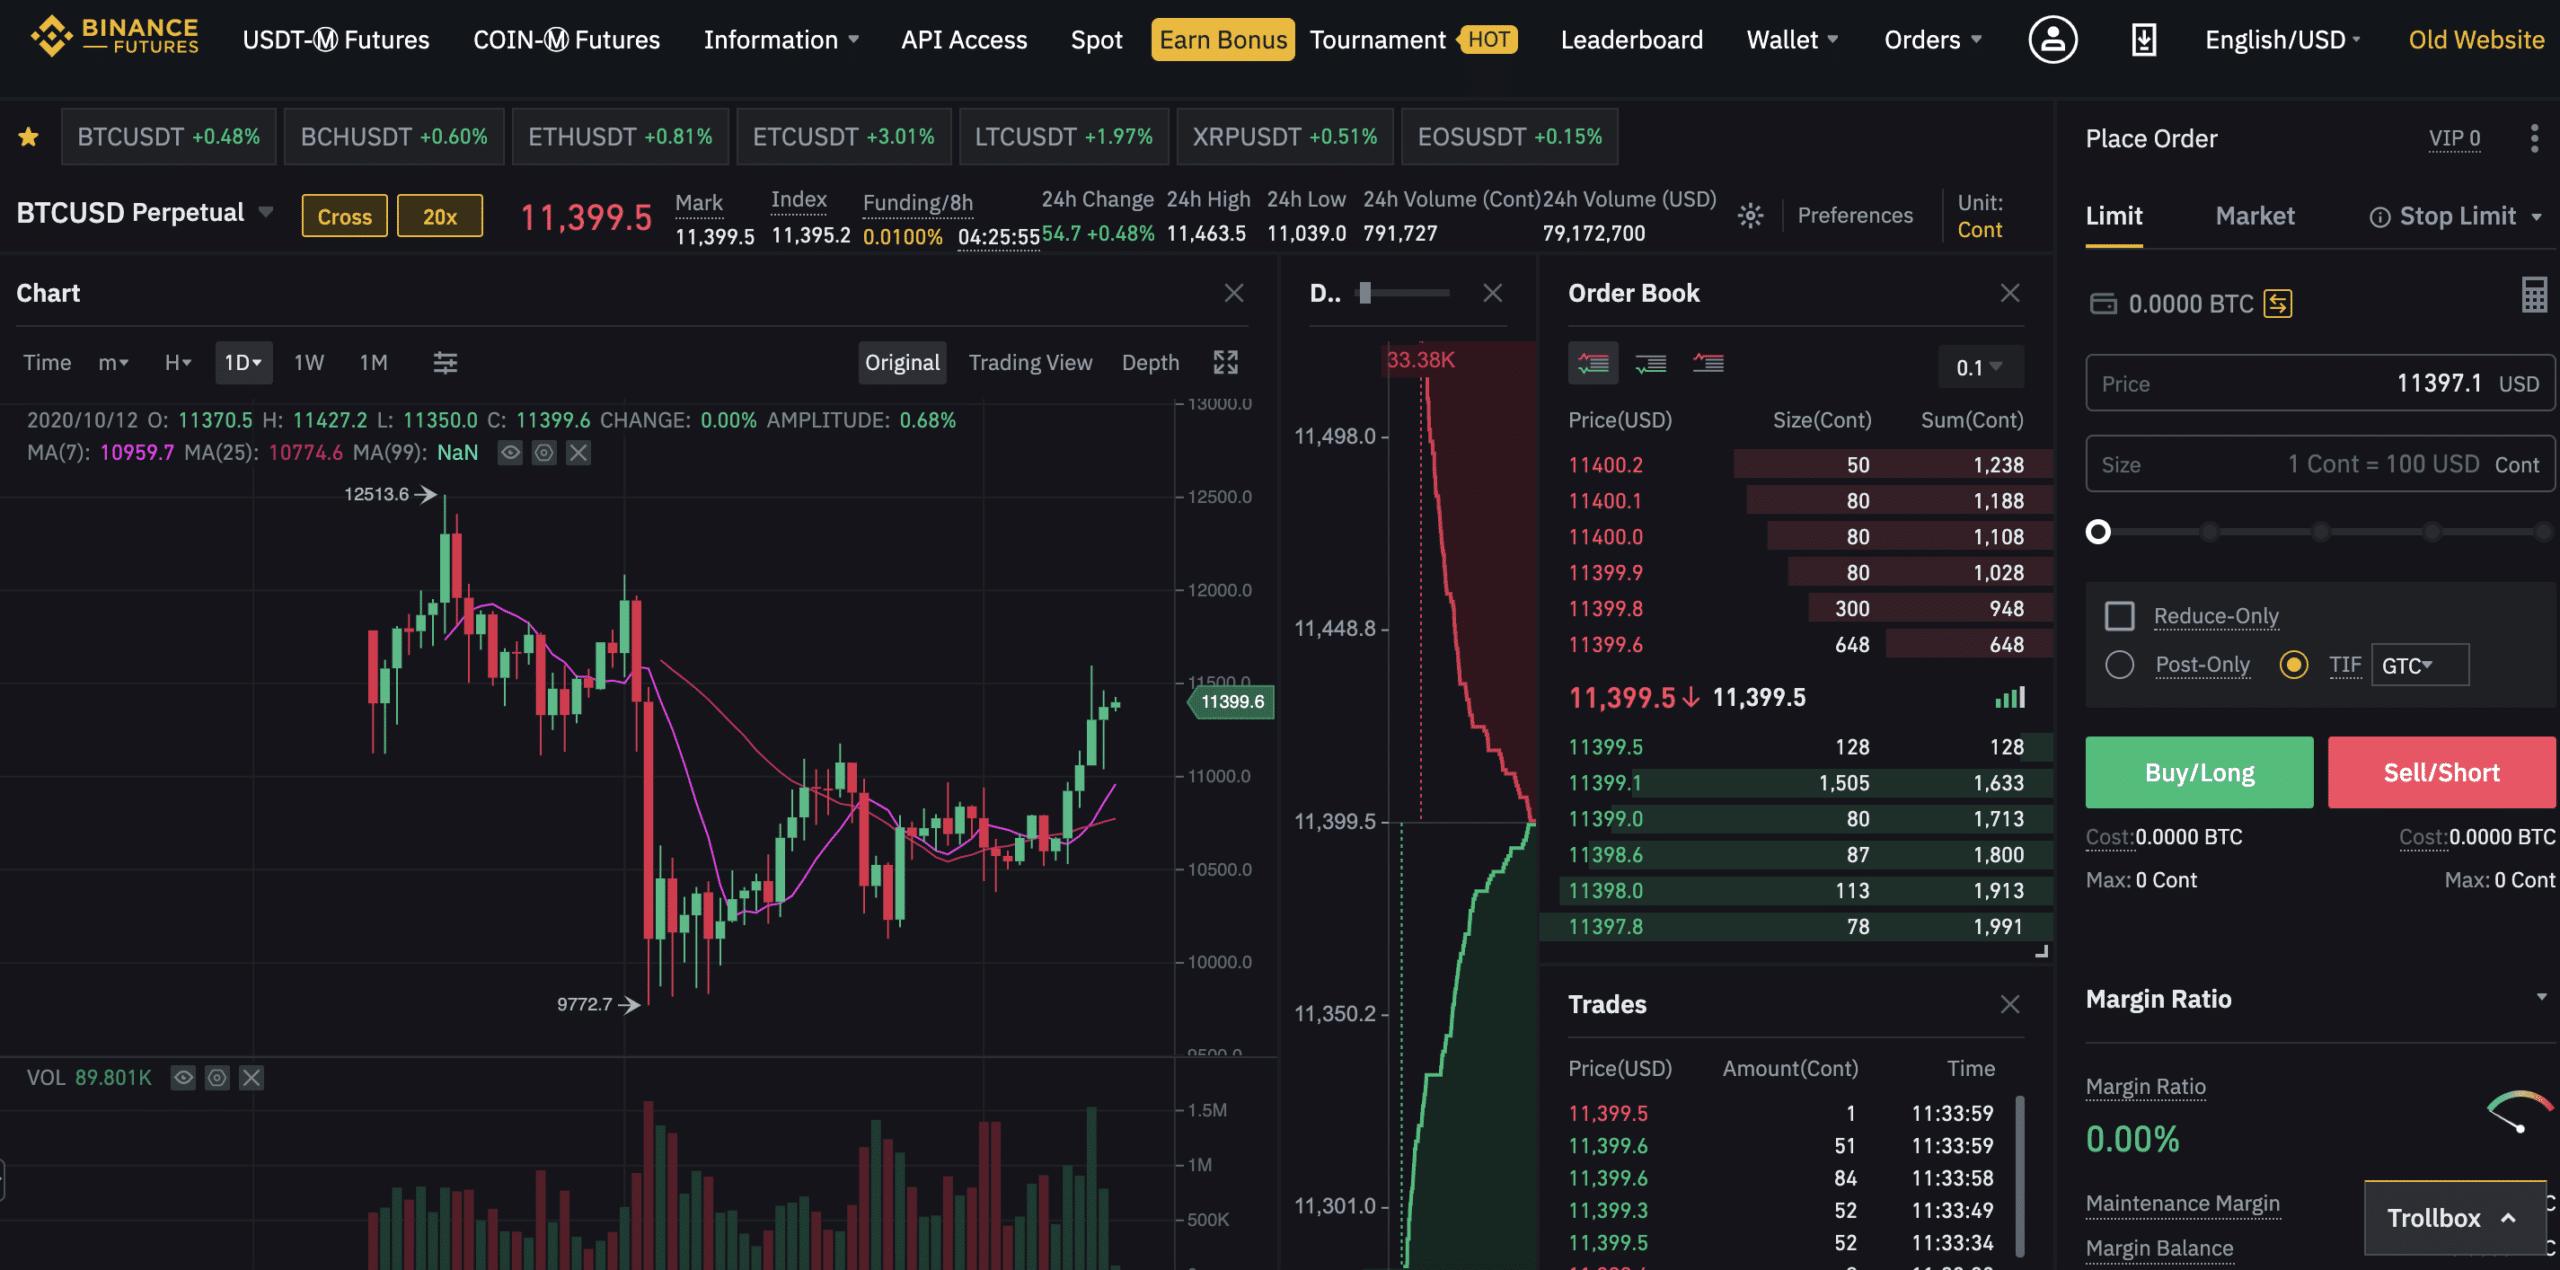 is binance easy to use